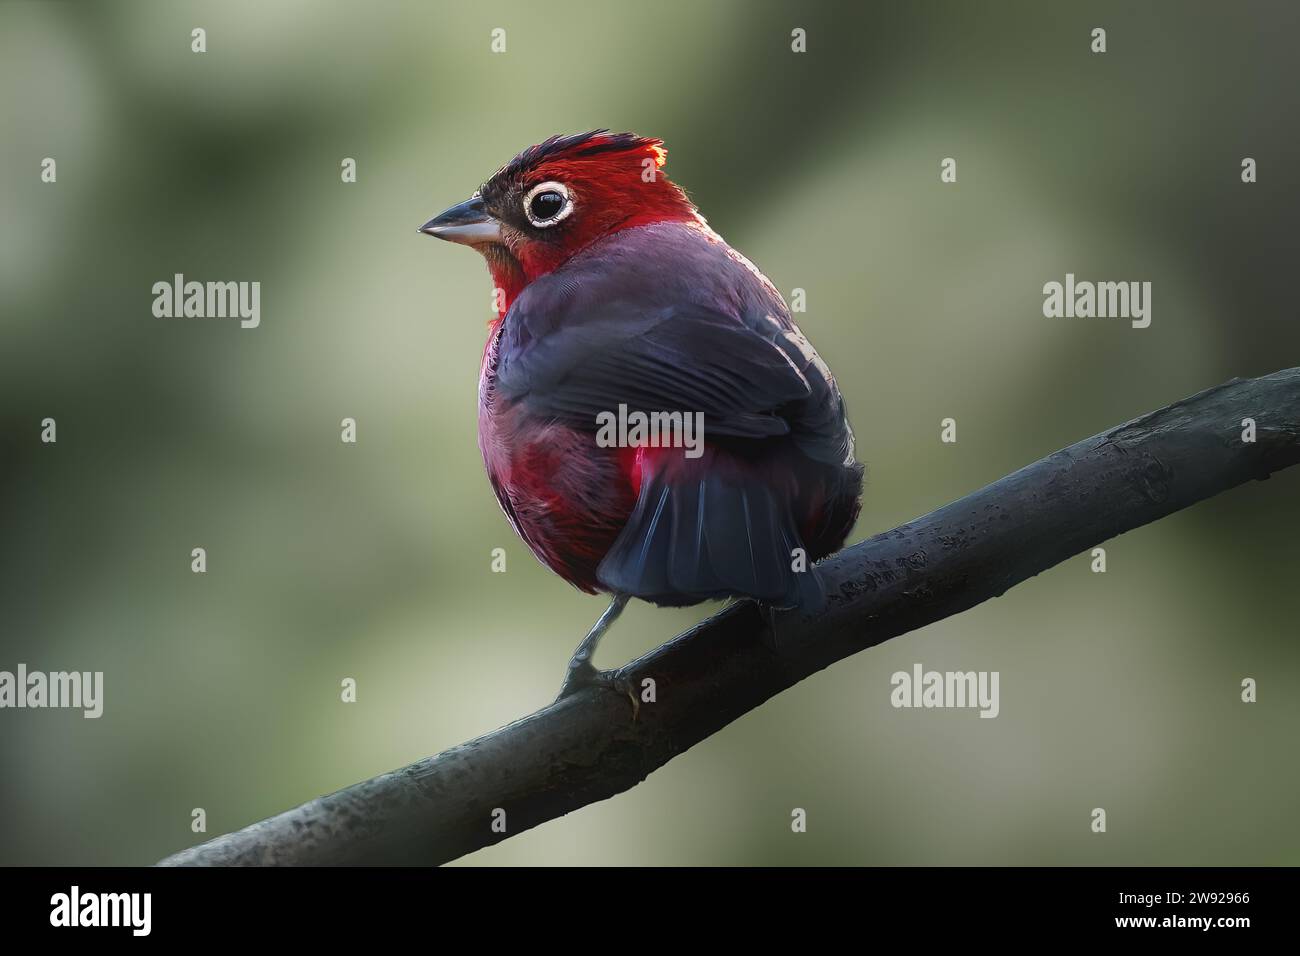 Red Pileated Finch bird (Coryphospingus cucullatus) Stock Photo